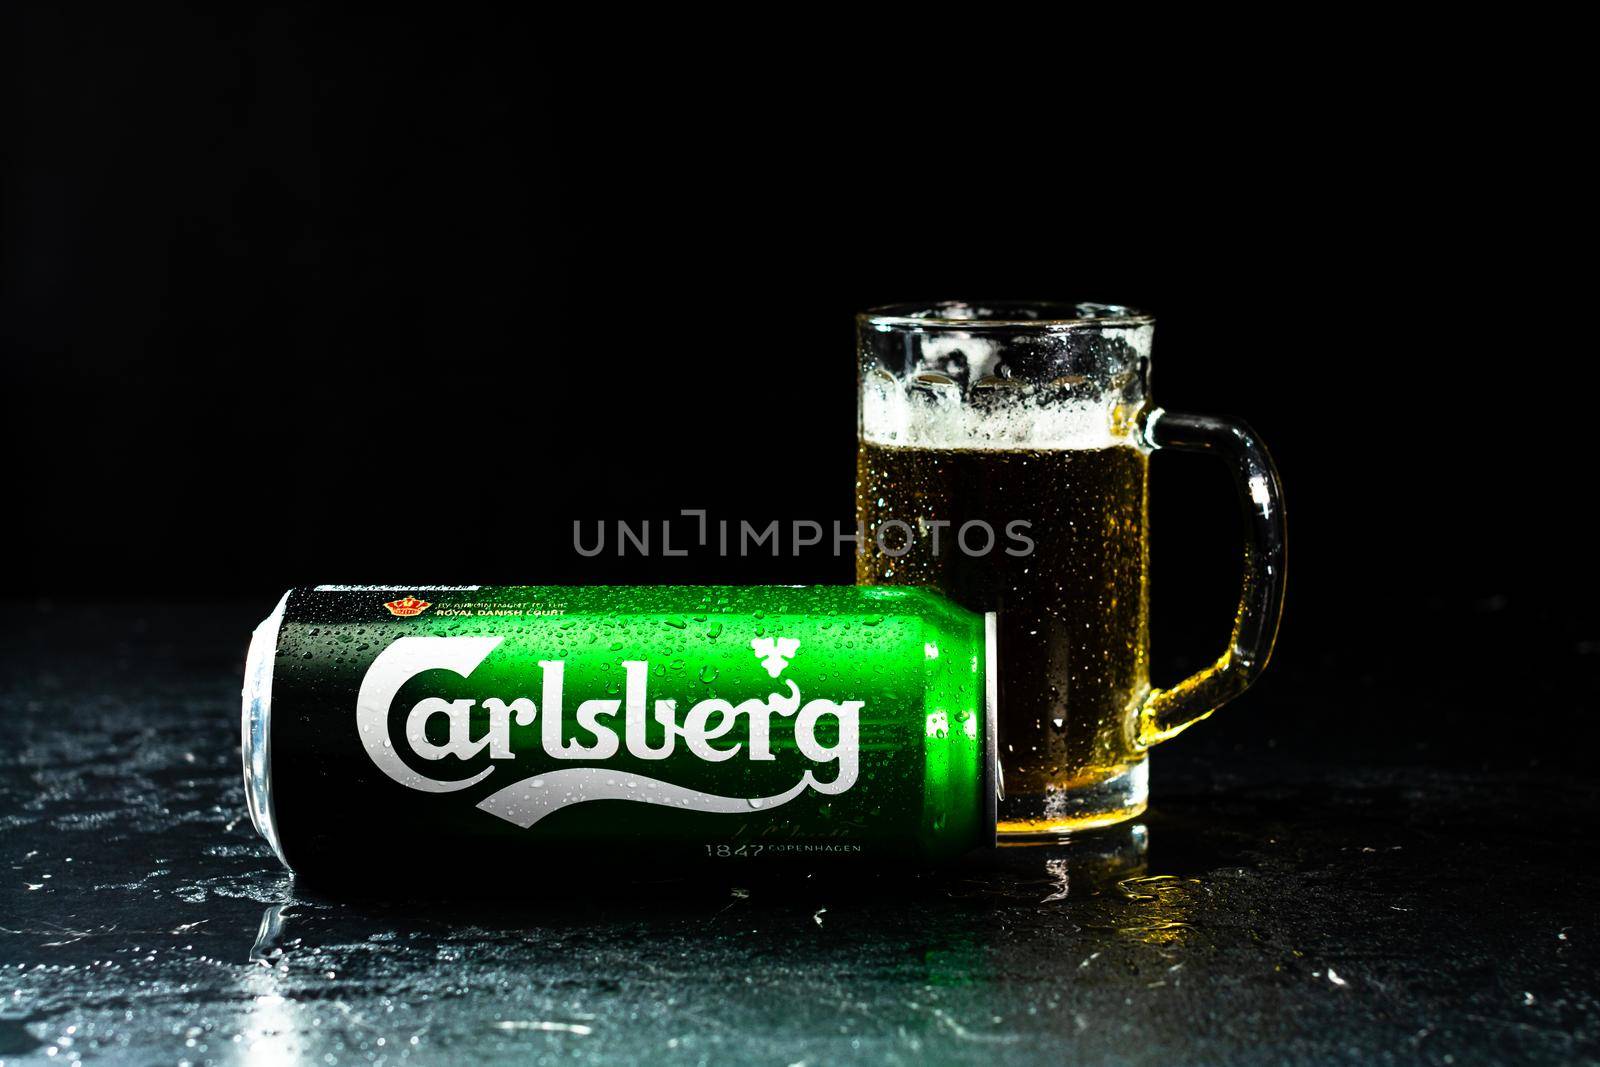 Can of Carlsberg beer and beer glass on dark background. Illustrative editorial photo shot in Bucharest, Romania, 2021 by vladispas